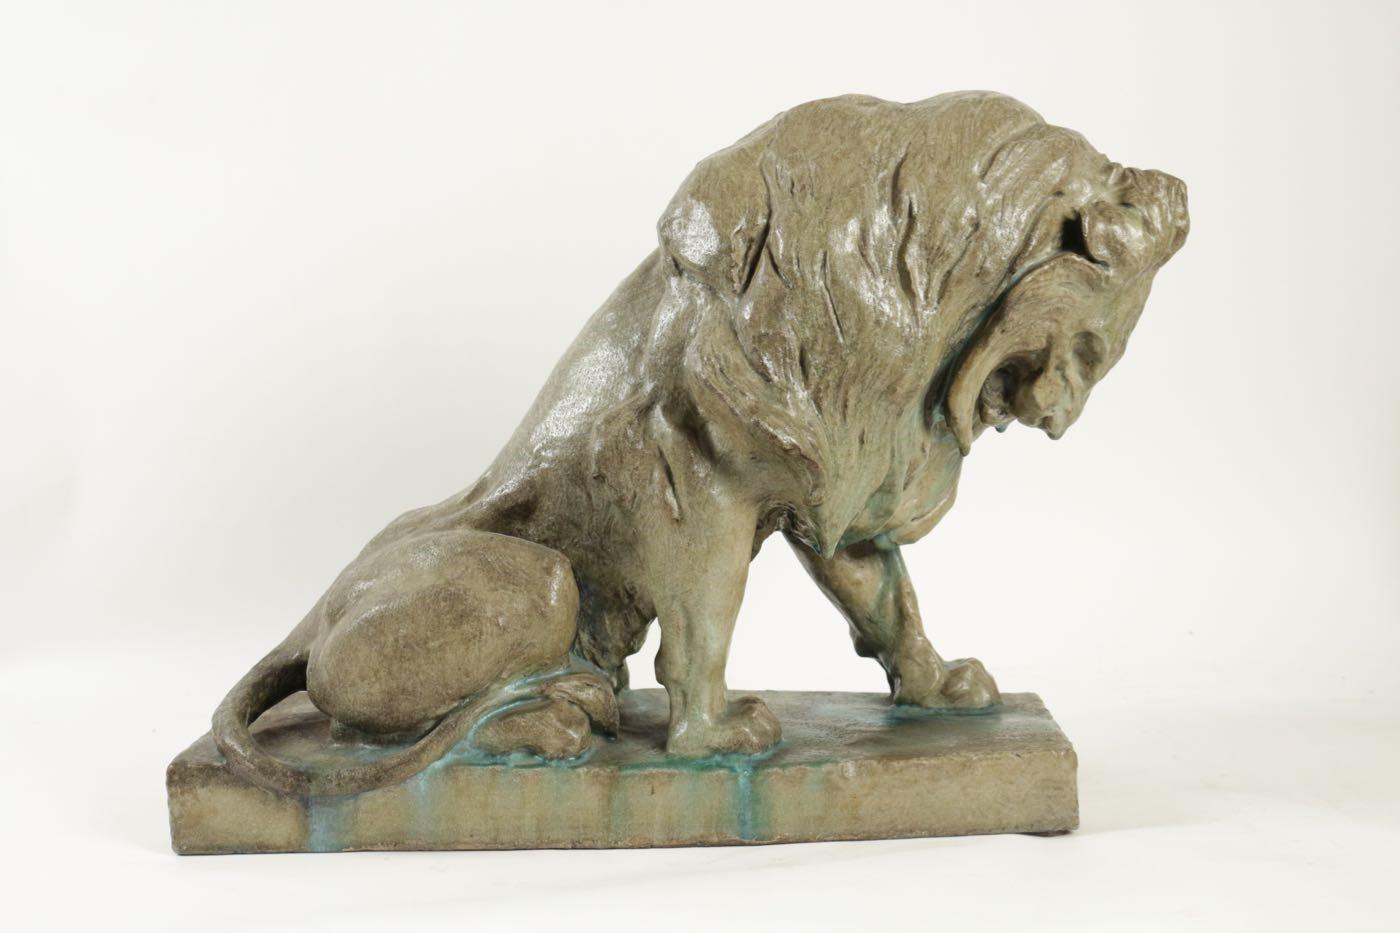 Paul Jouve sculptor (1878-1973) & Emile Muller ceramist (1915-1988)
sitting lion, early 20th century
Seated lion in enameled sandstone, model created in 1900 by Paul Jouve (1878-1973) and produced by The Muller Company from 1901. Signed Paul Jouve